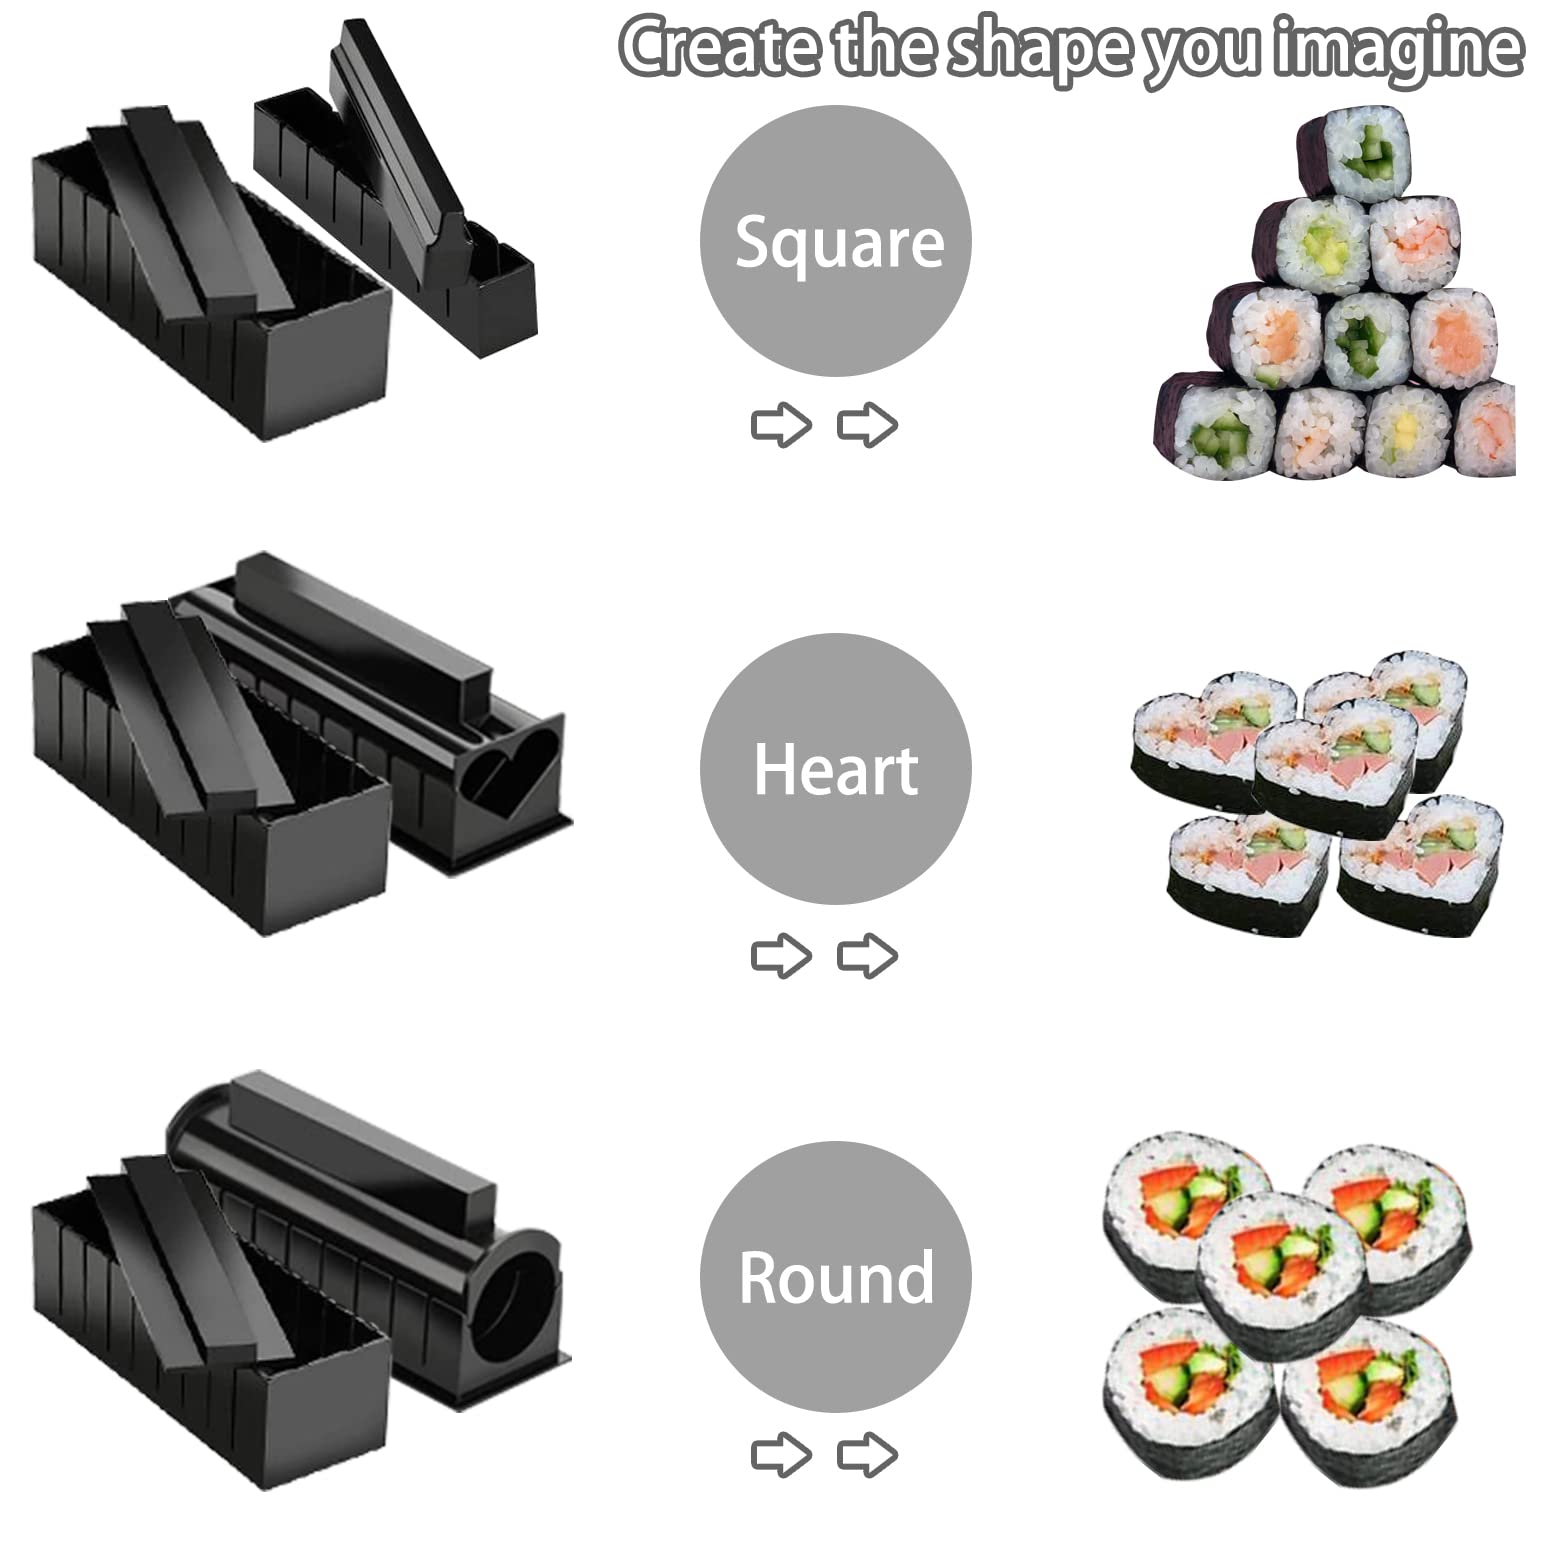 ELEDUCTMON Sushi Making Kit for Beginners - Original Sushi Maker Deluxe Exclusive Online Video Tutorials Complete with Sushi Knife 11 Piece DIY Sushi Set - Easy and Fun - Sushi Rolls - Maki Rolls